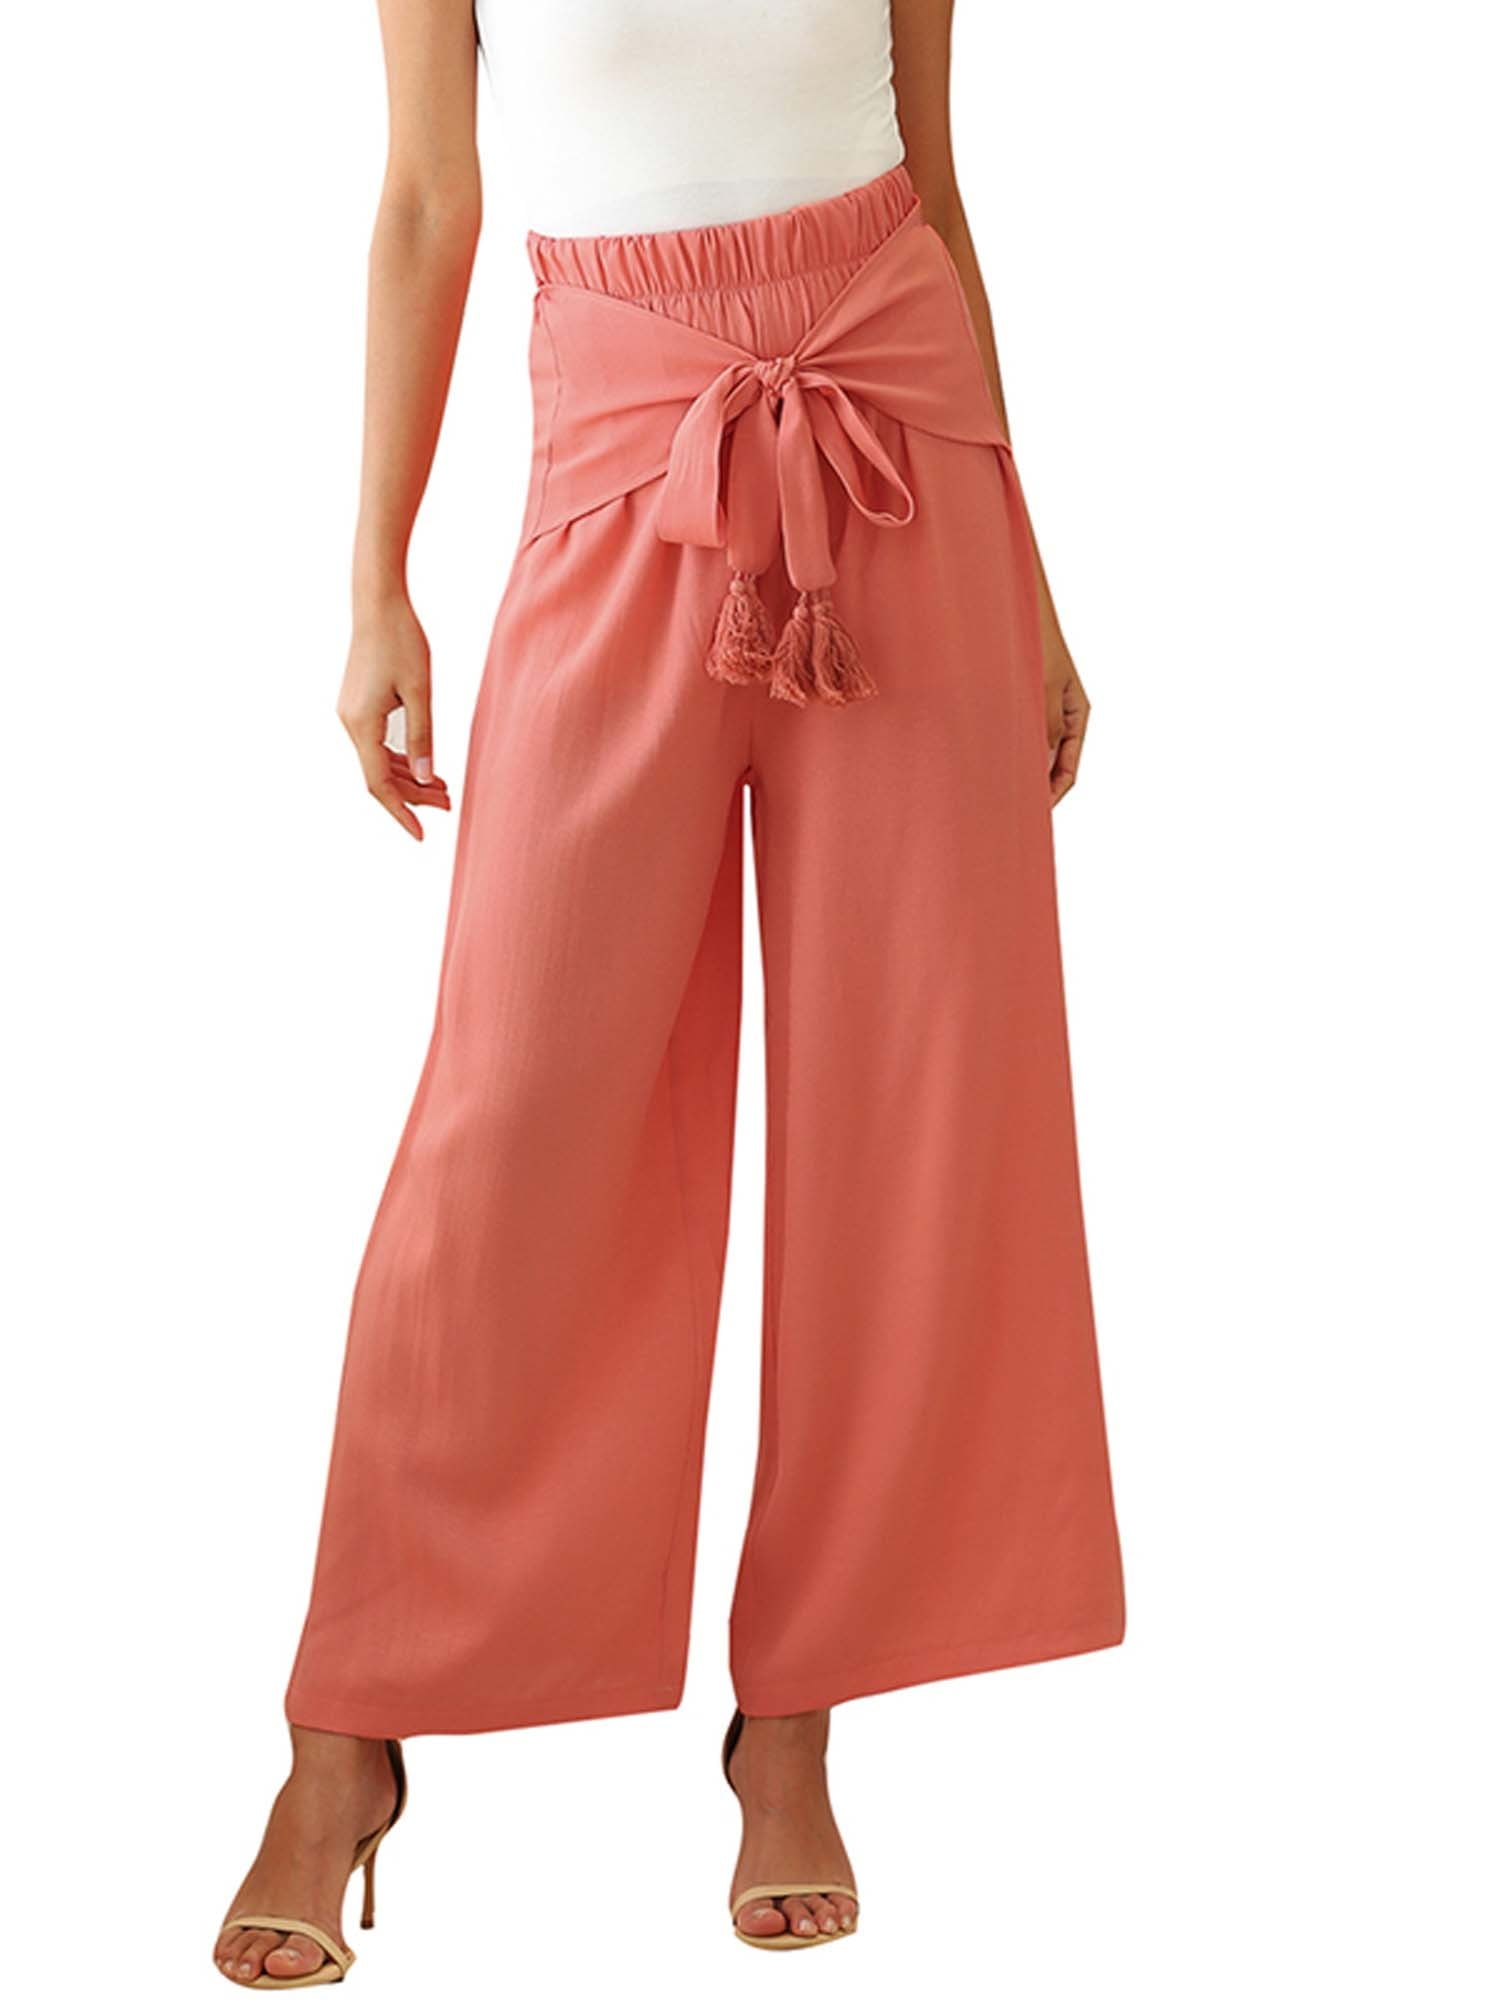 Womens High Waisted Wide Leg Pants Button up Flowing Palazzo Pants Back Zip Lightweight Loose Slacks 2019 Casual Work Long Trousers